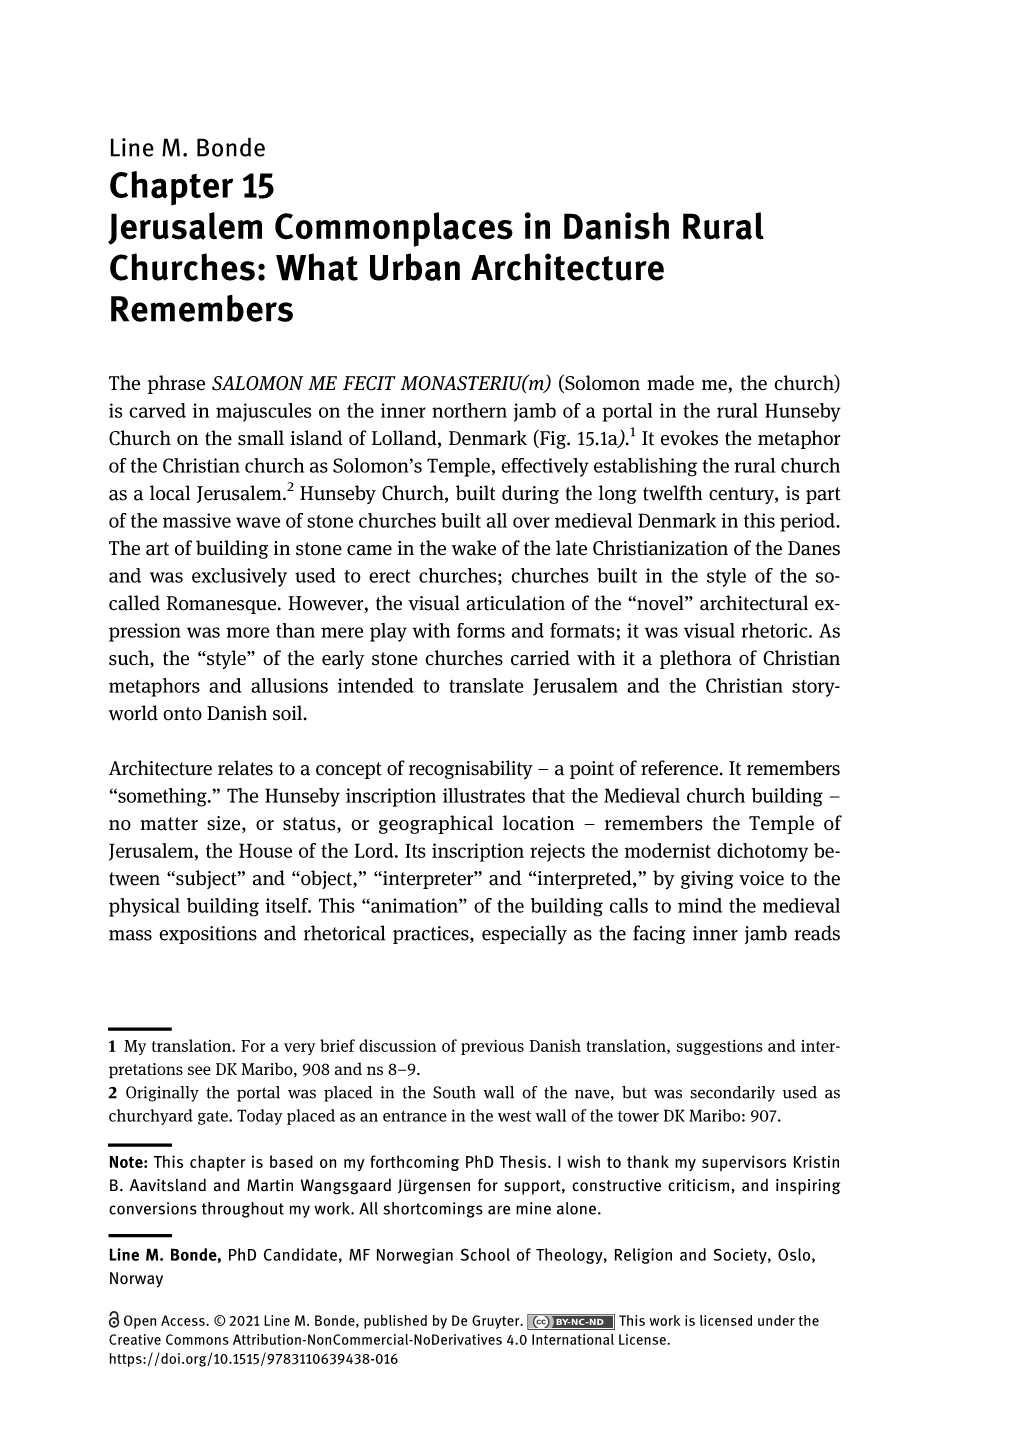 Jerusalem Commonplaces in Danish Rural Churches: What Urban Architecture Remembers